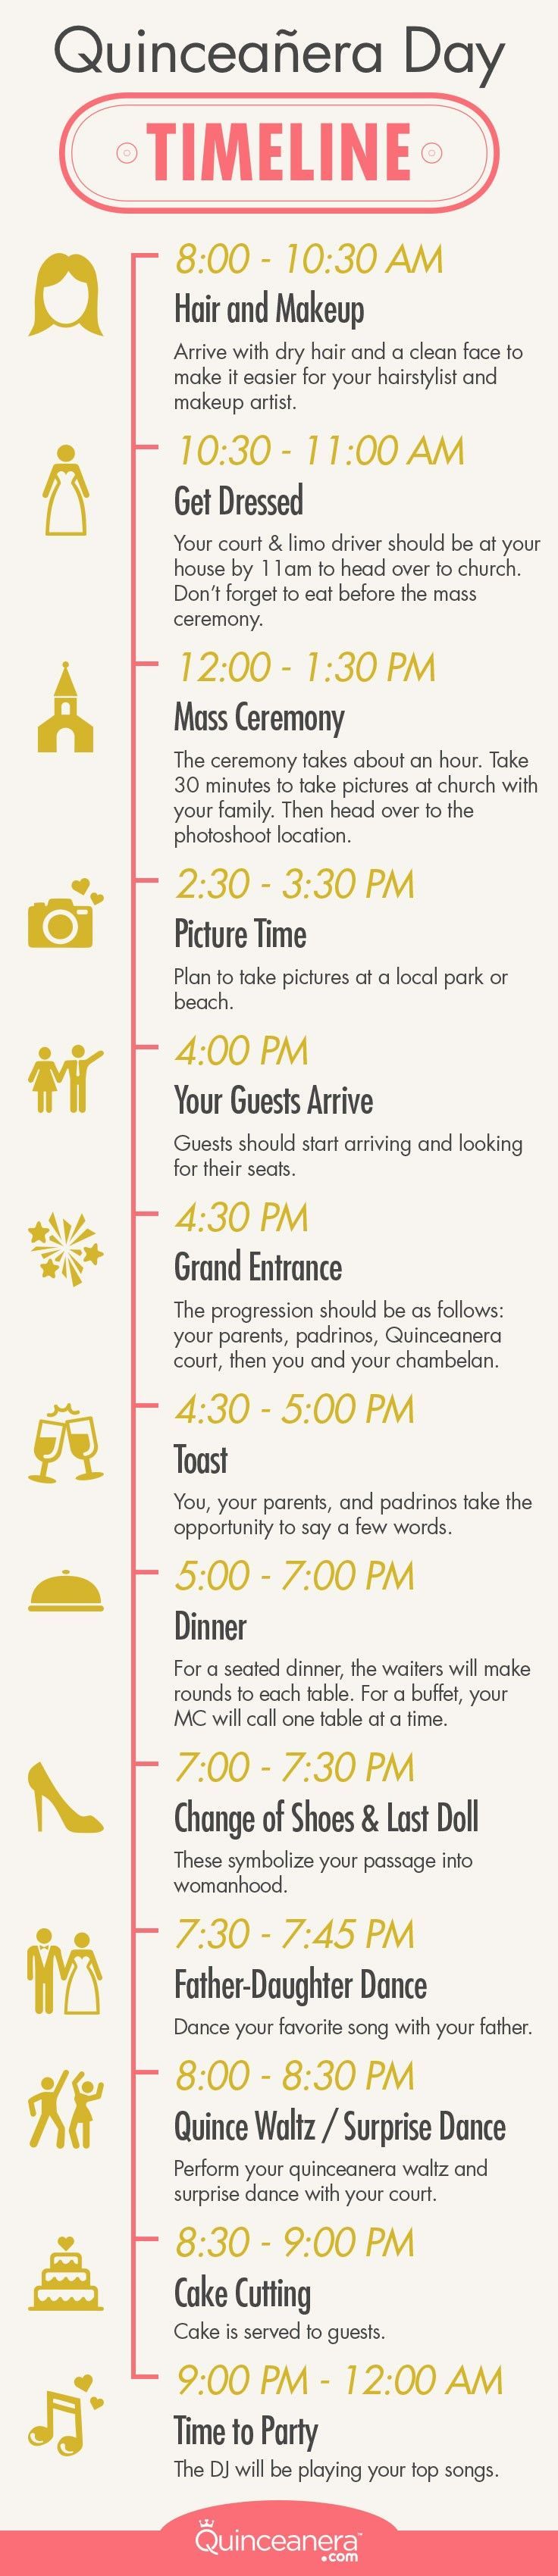 The complete guide to your quinceanera day guideline | Quinceanera Day Timeline | Quinceanera Planning